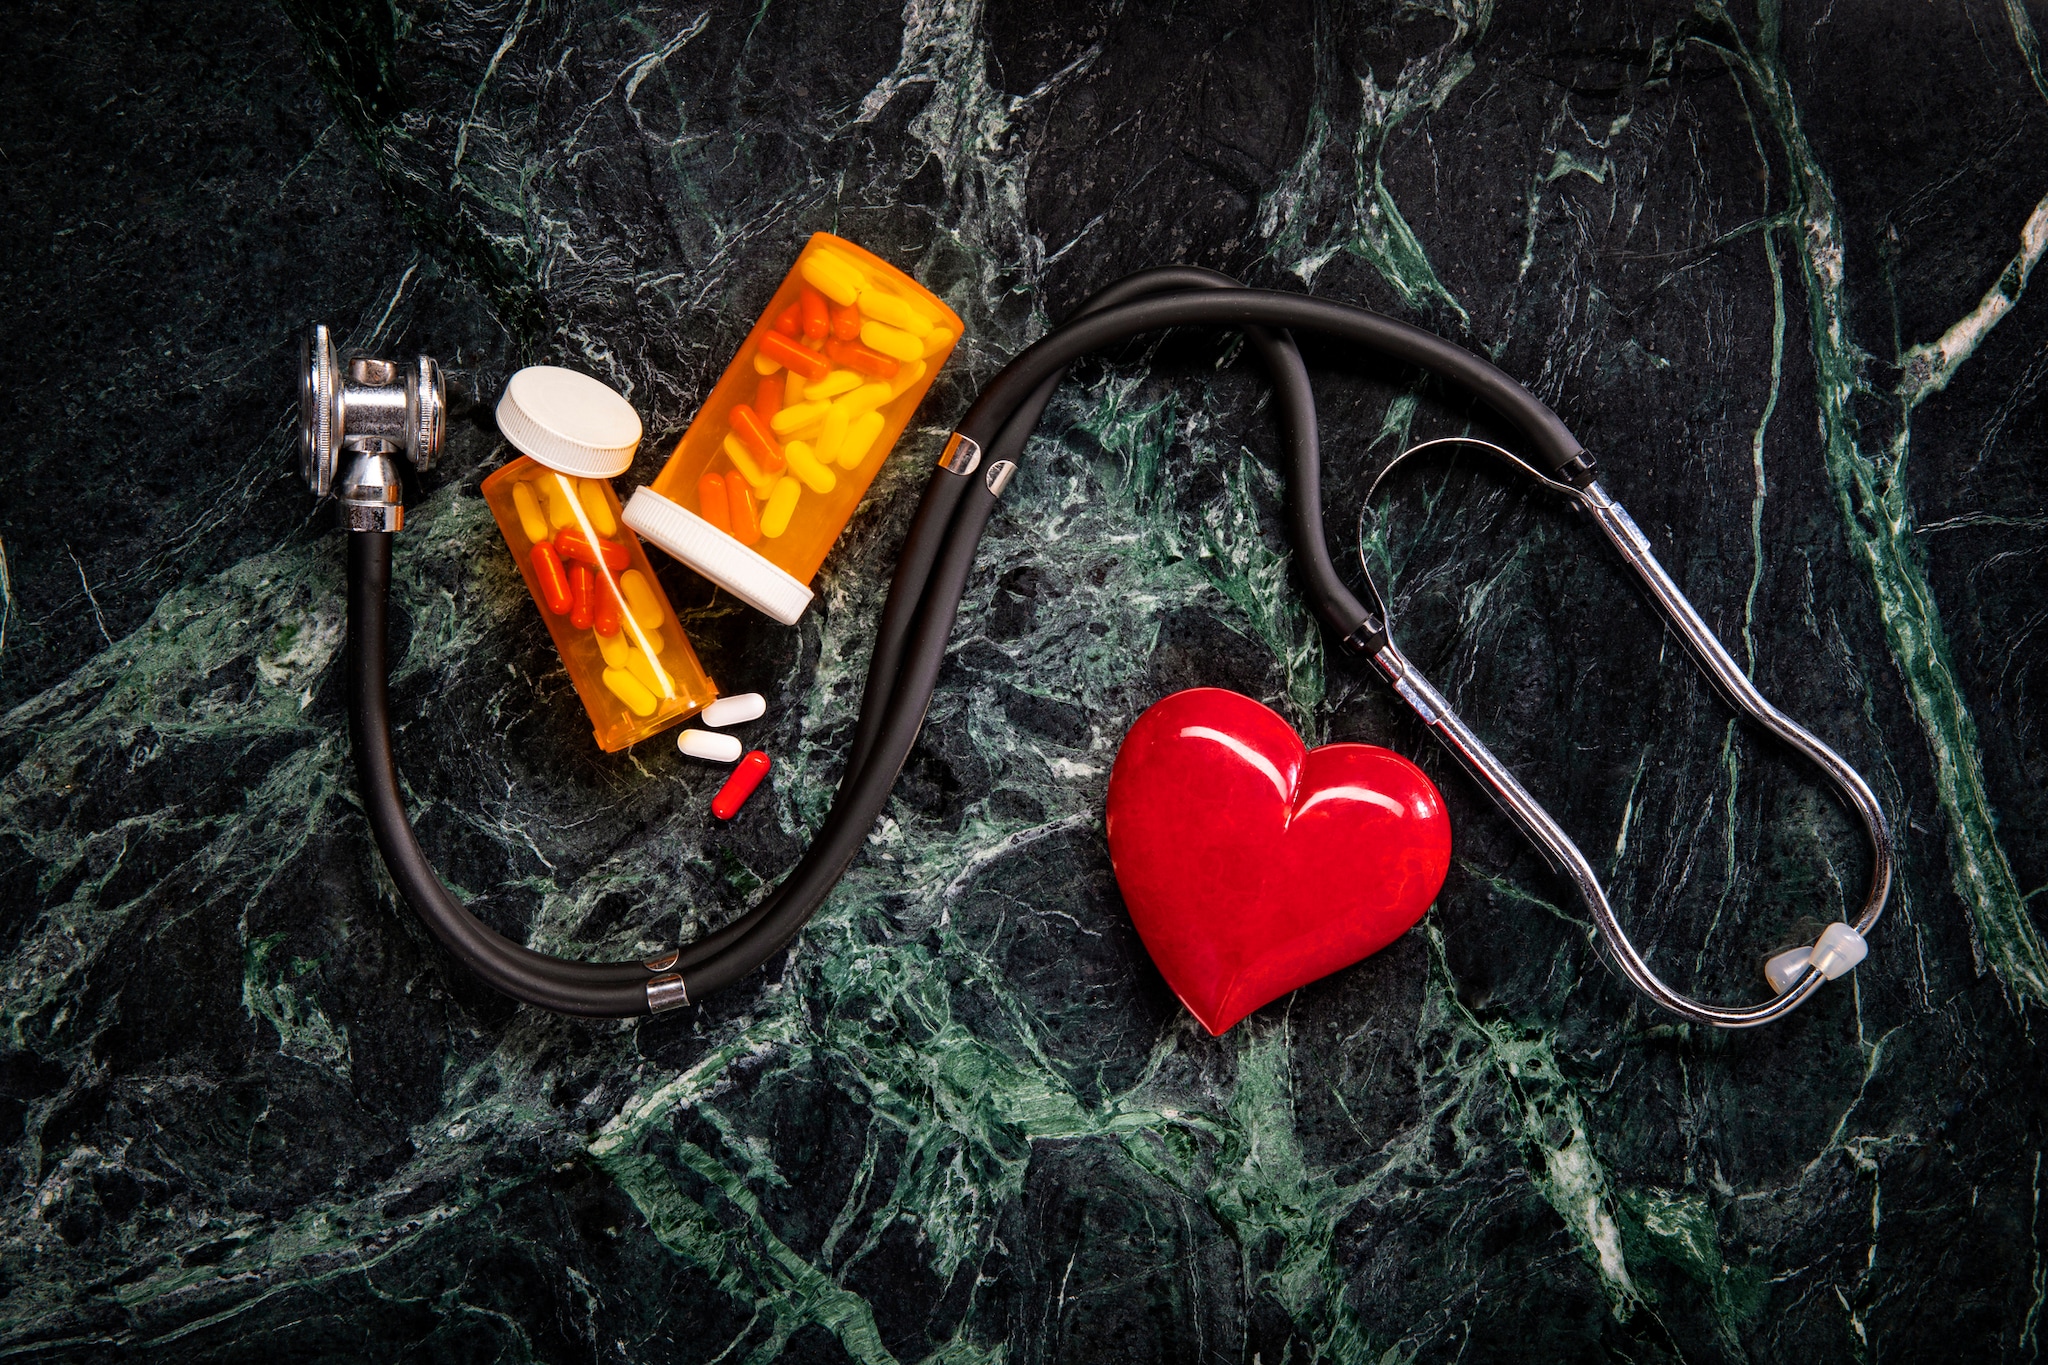 Stethoscope, medicine bottles, and red plastic heart against a dark marbled background.